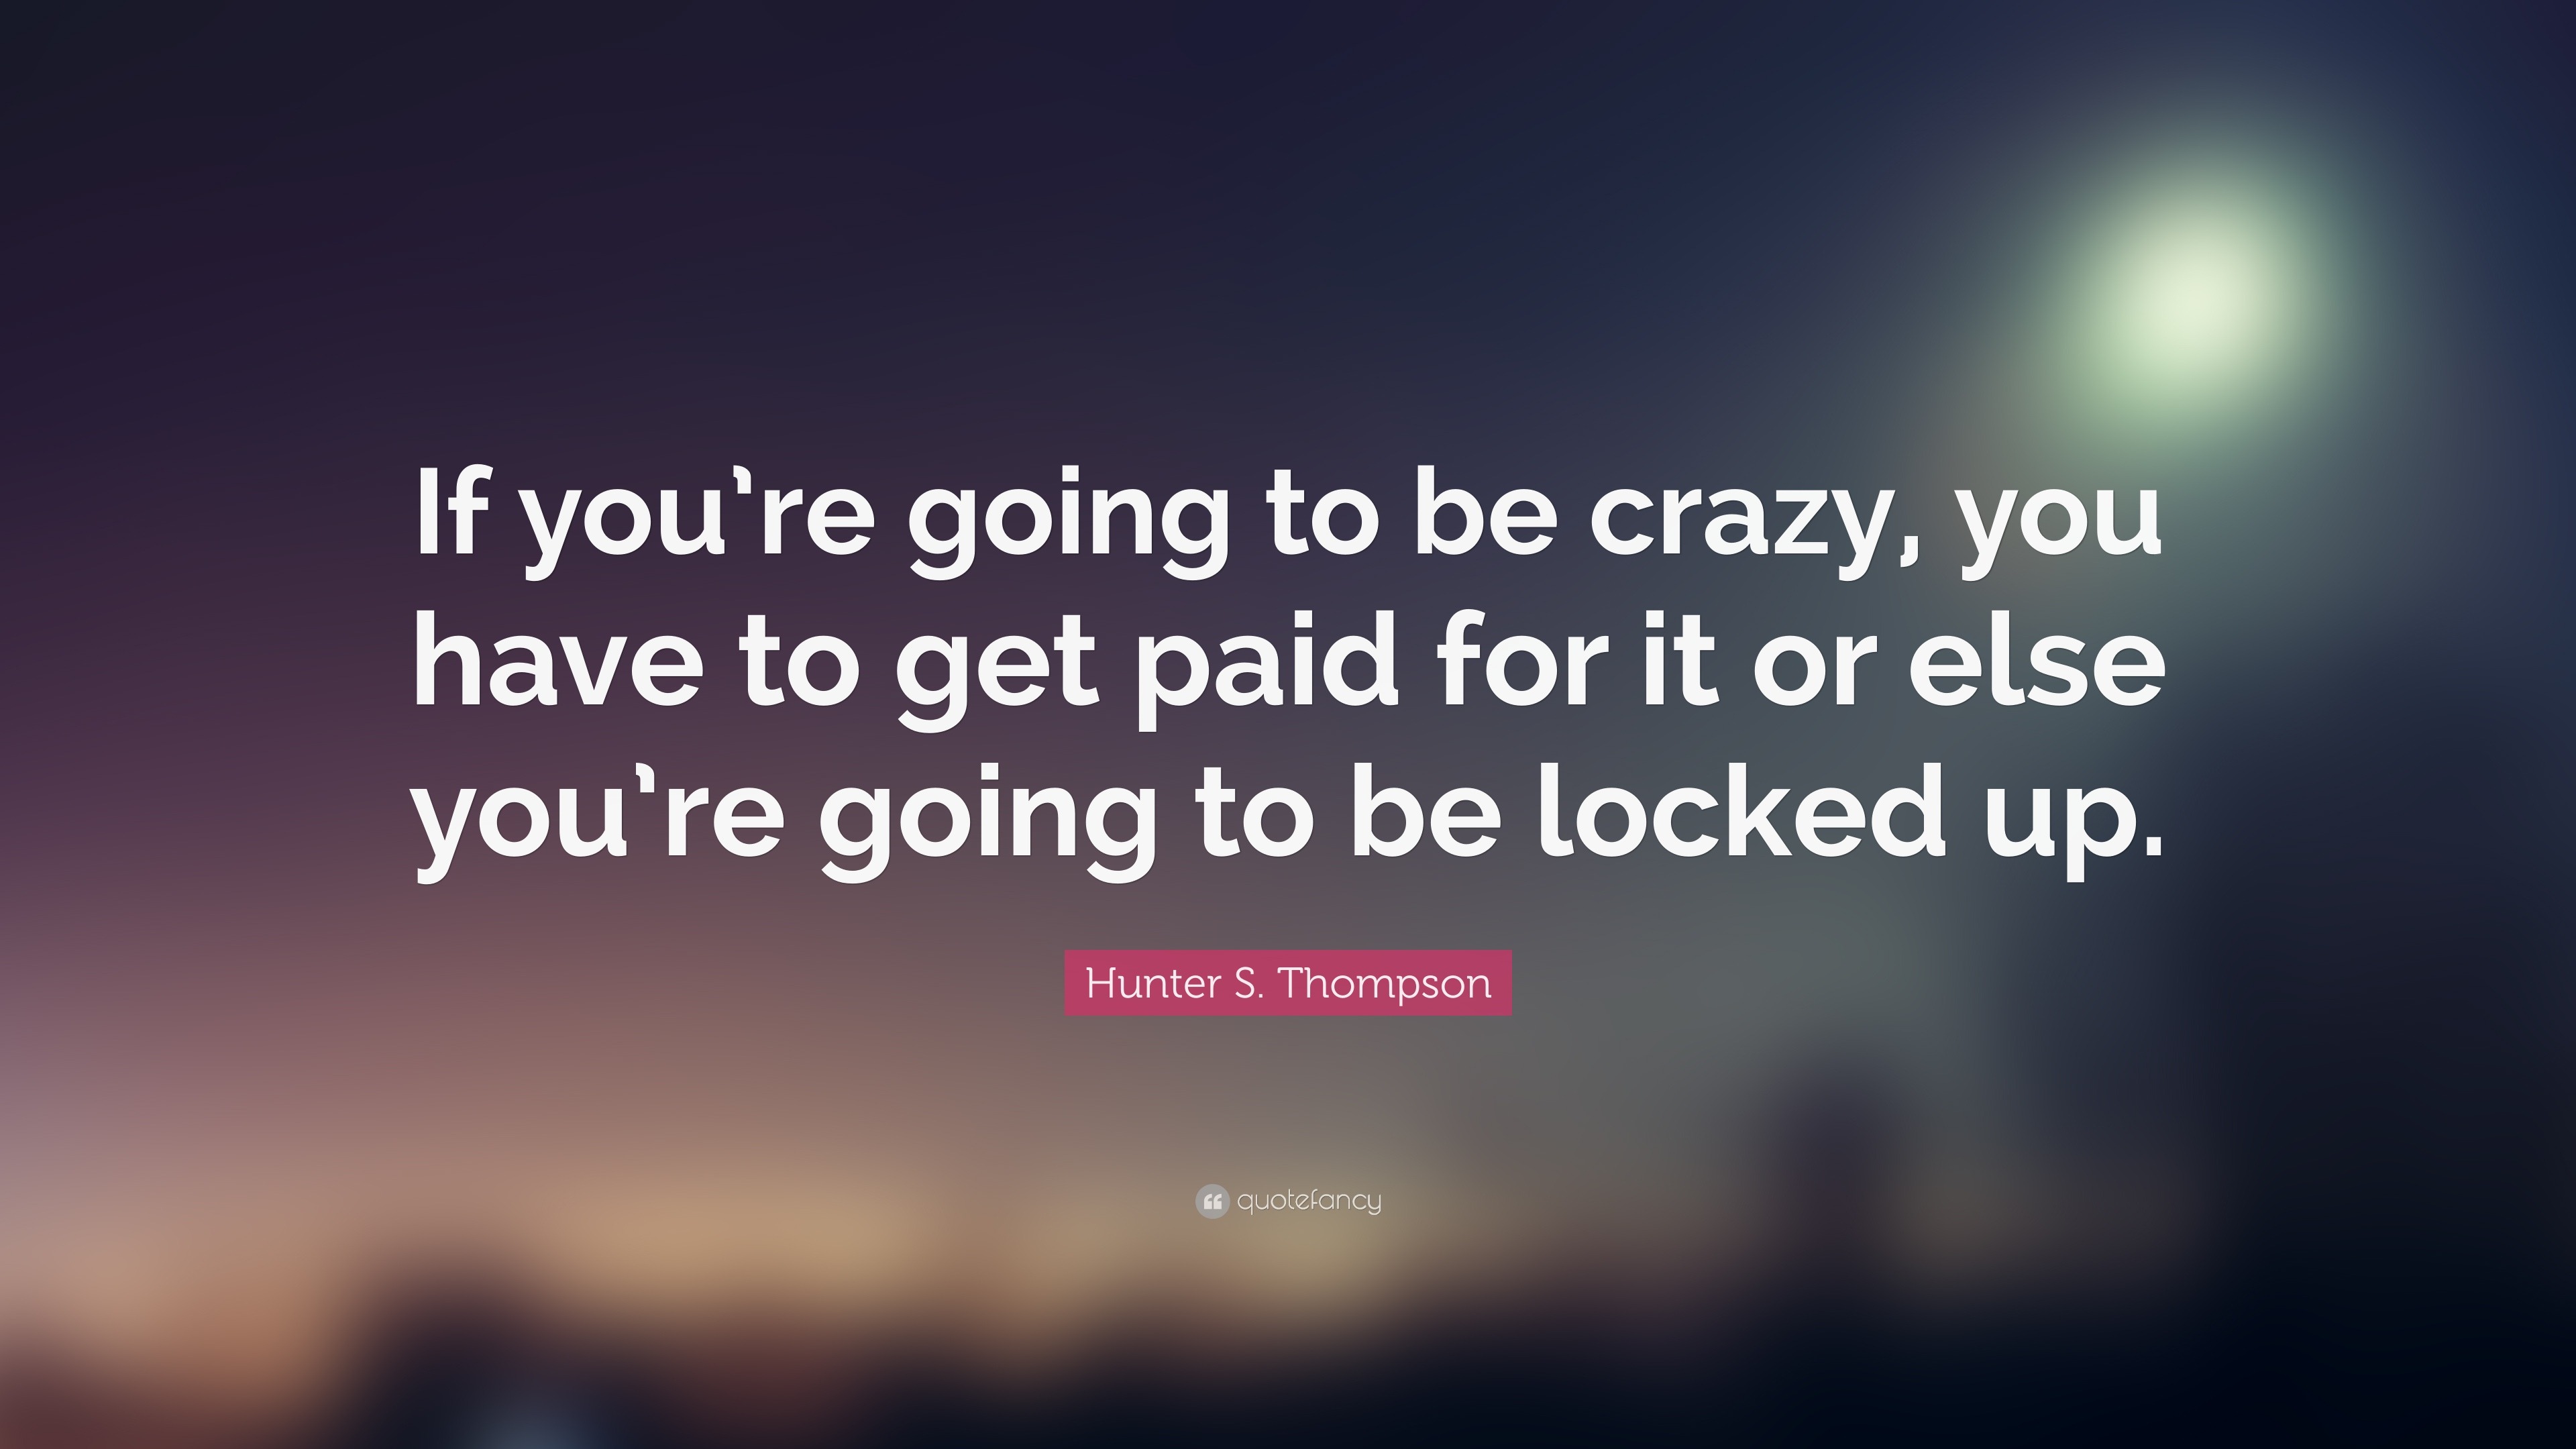 Hunter S. Thompson Quote: “If you're going to be crazy, you have to get paid